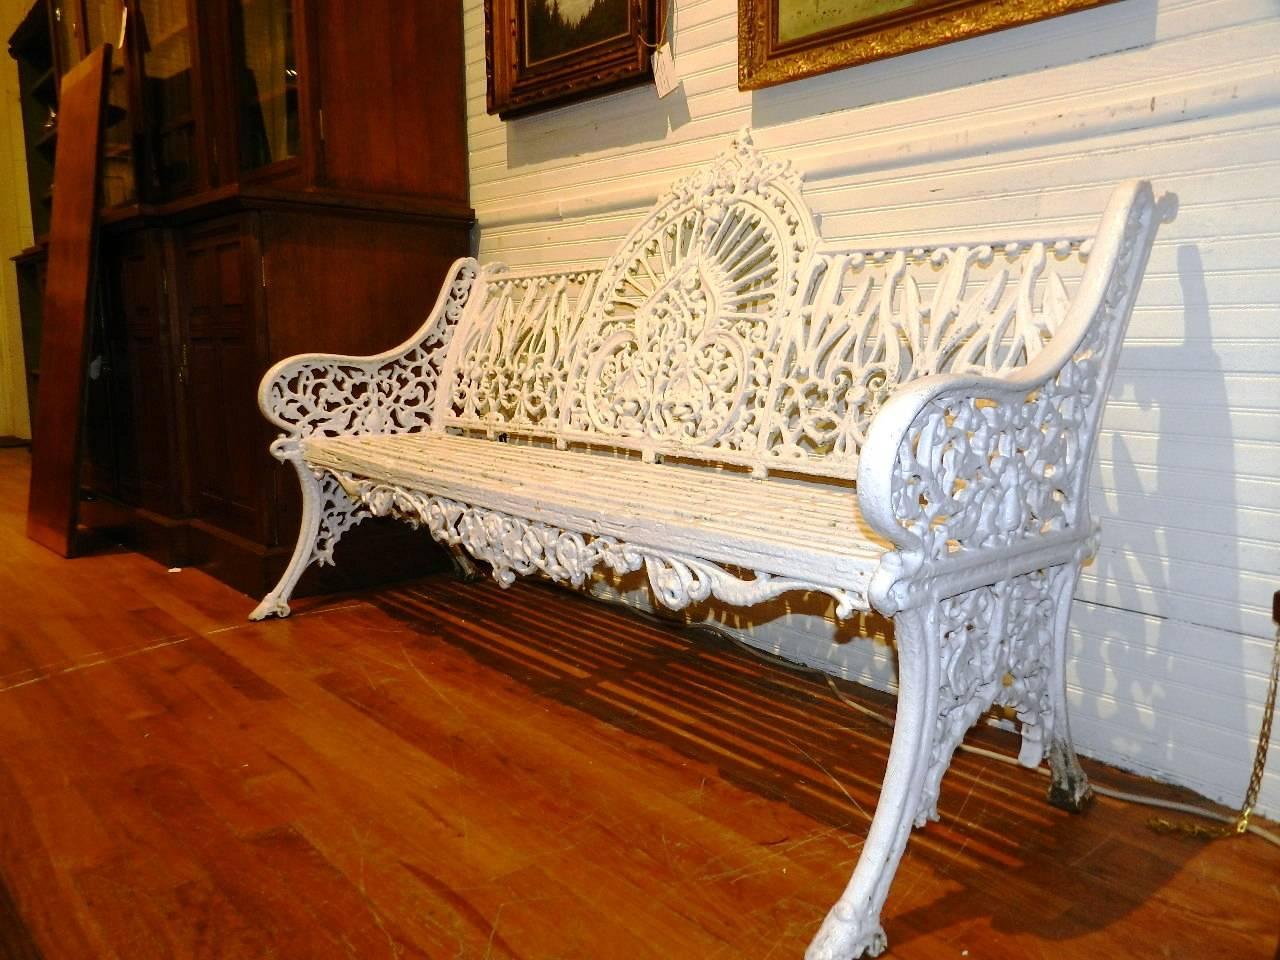 Coalbrookdale Cast Iron Bench In Excellent Condition For Sale In Millwood, VA